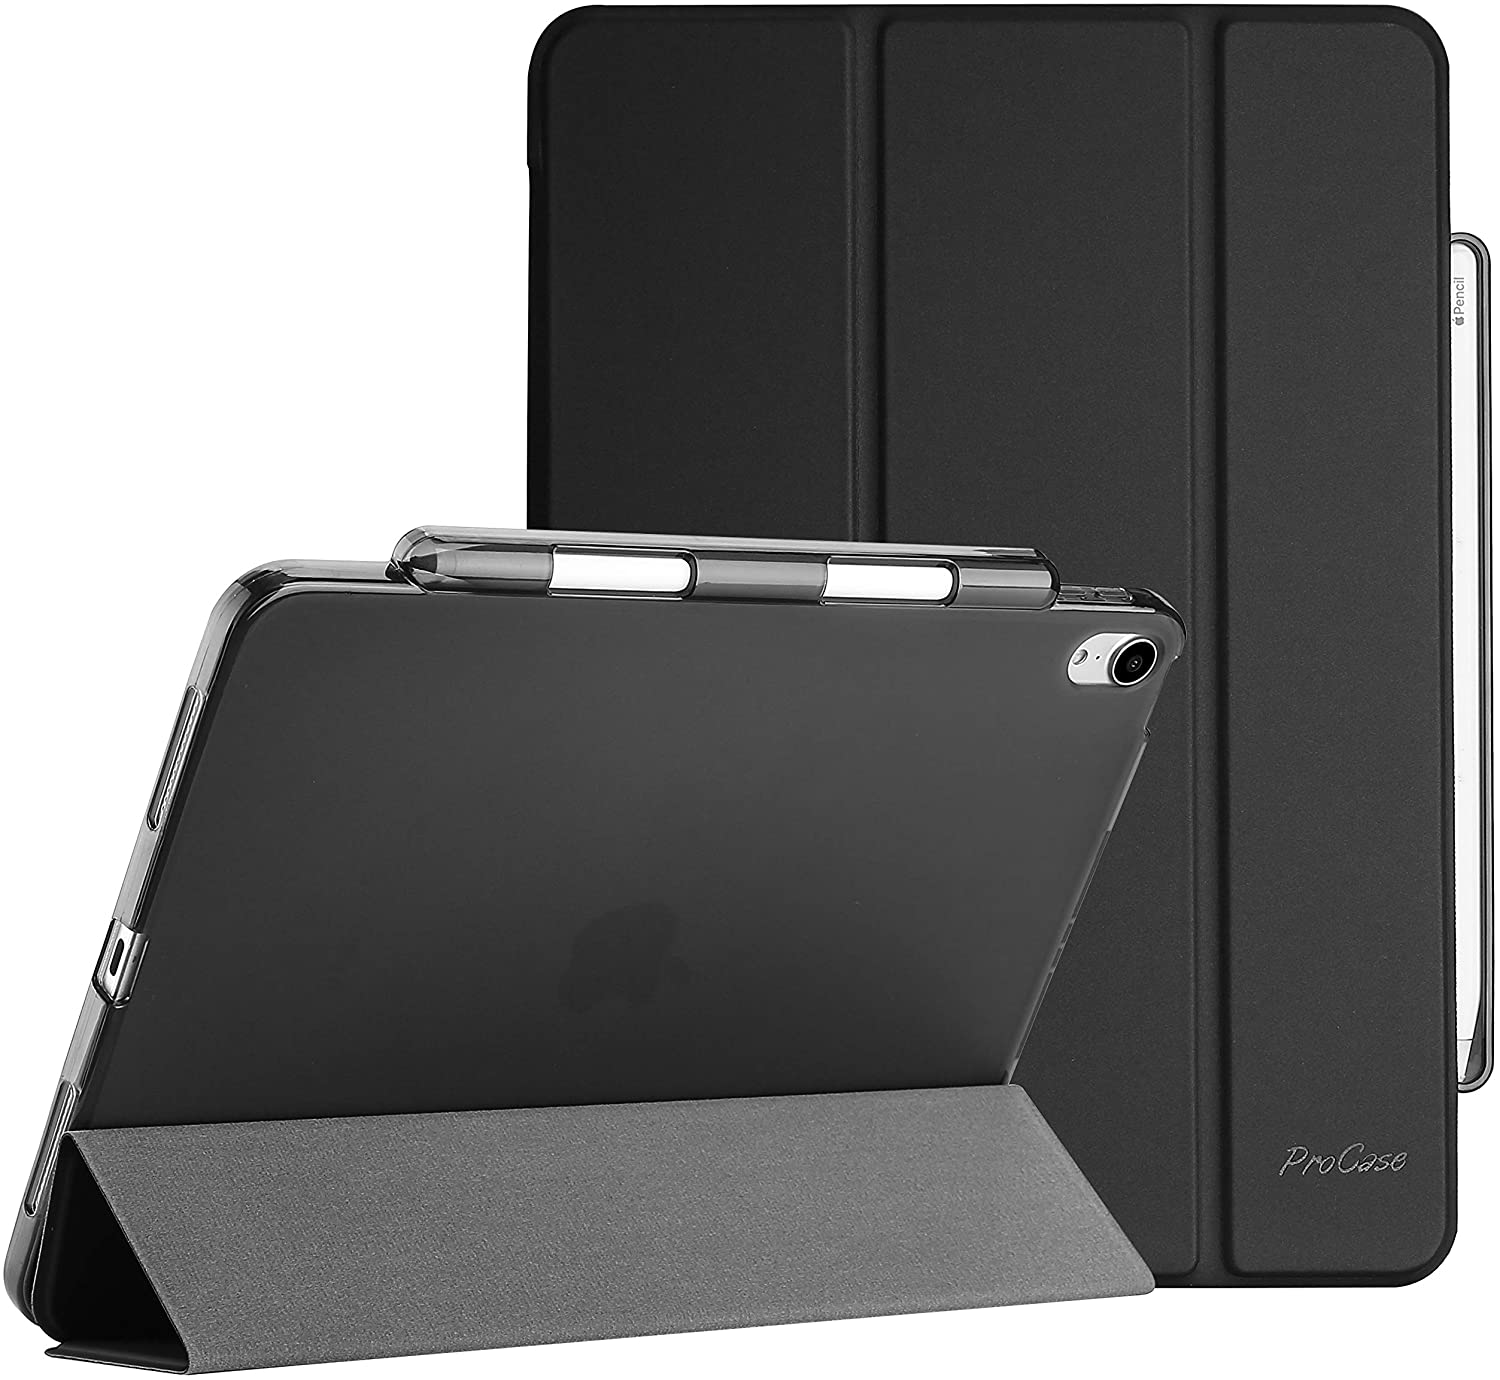 Basic black case with stand for iPad Air 4th generation